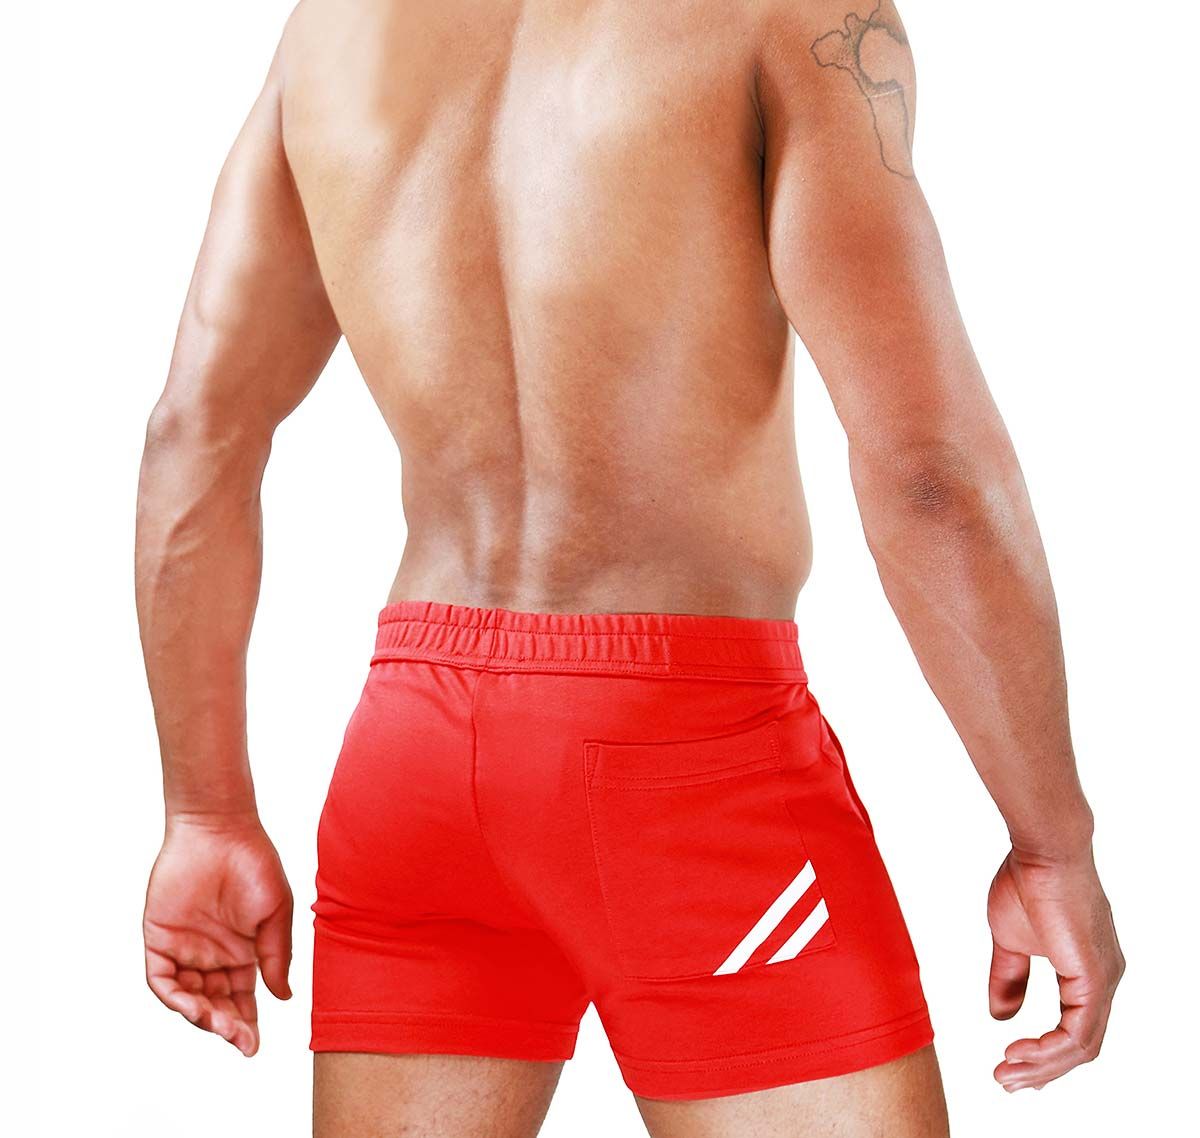 TOF Training shorts PARIS SHORTS RED SH0009RB, red